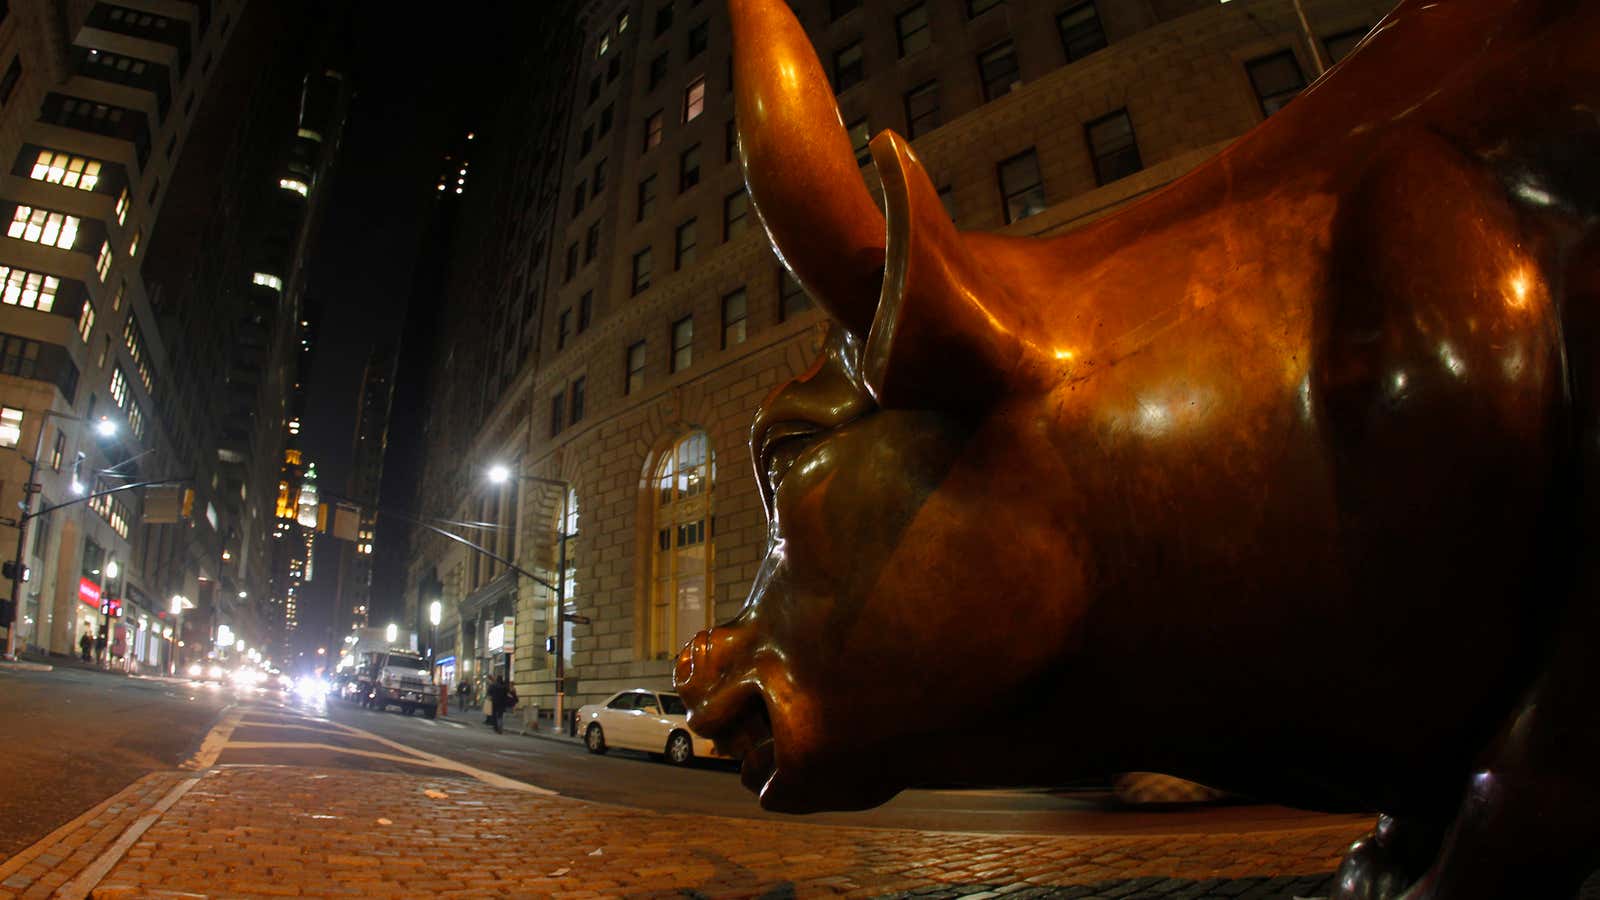 Things are getting lonely on Wall Street.